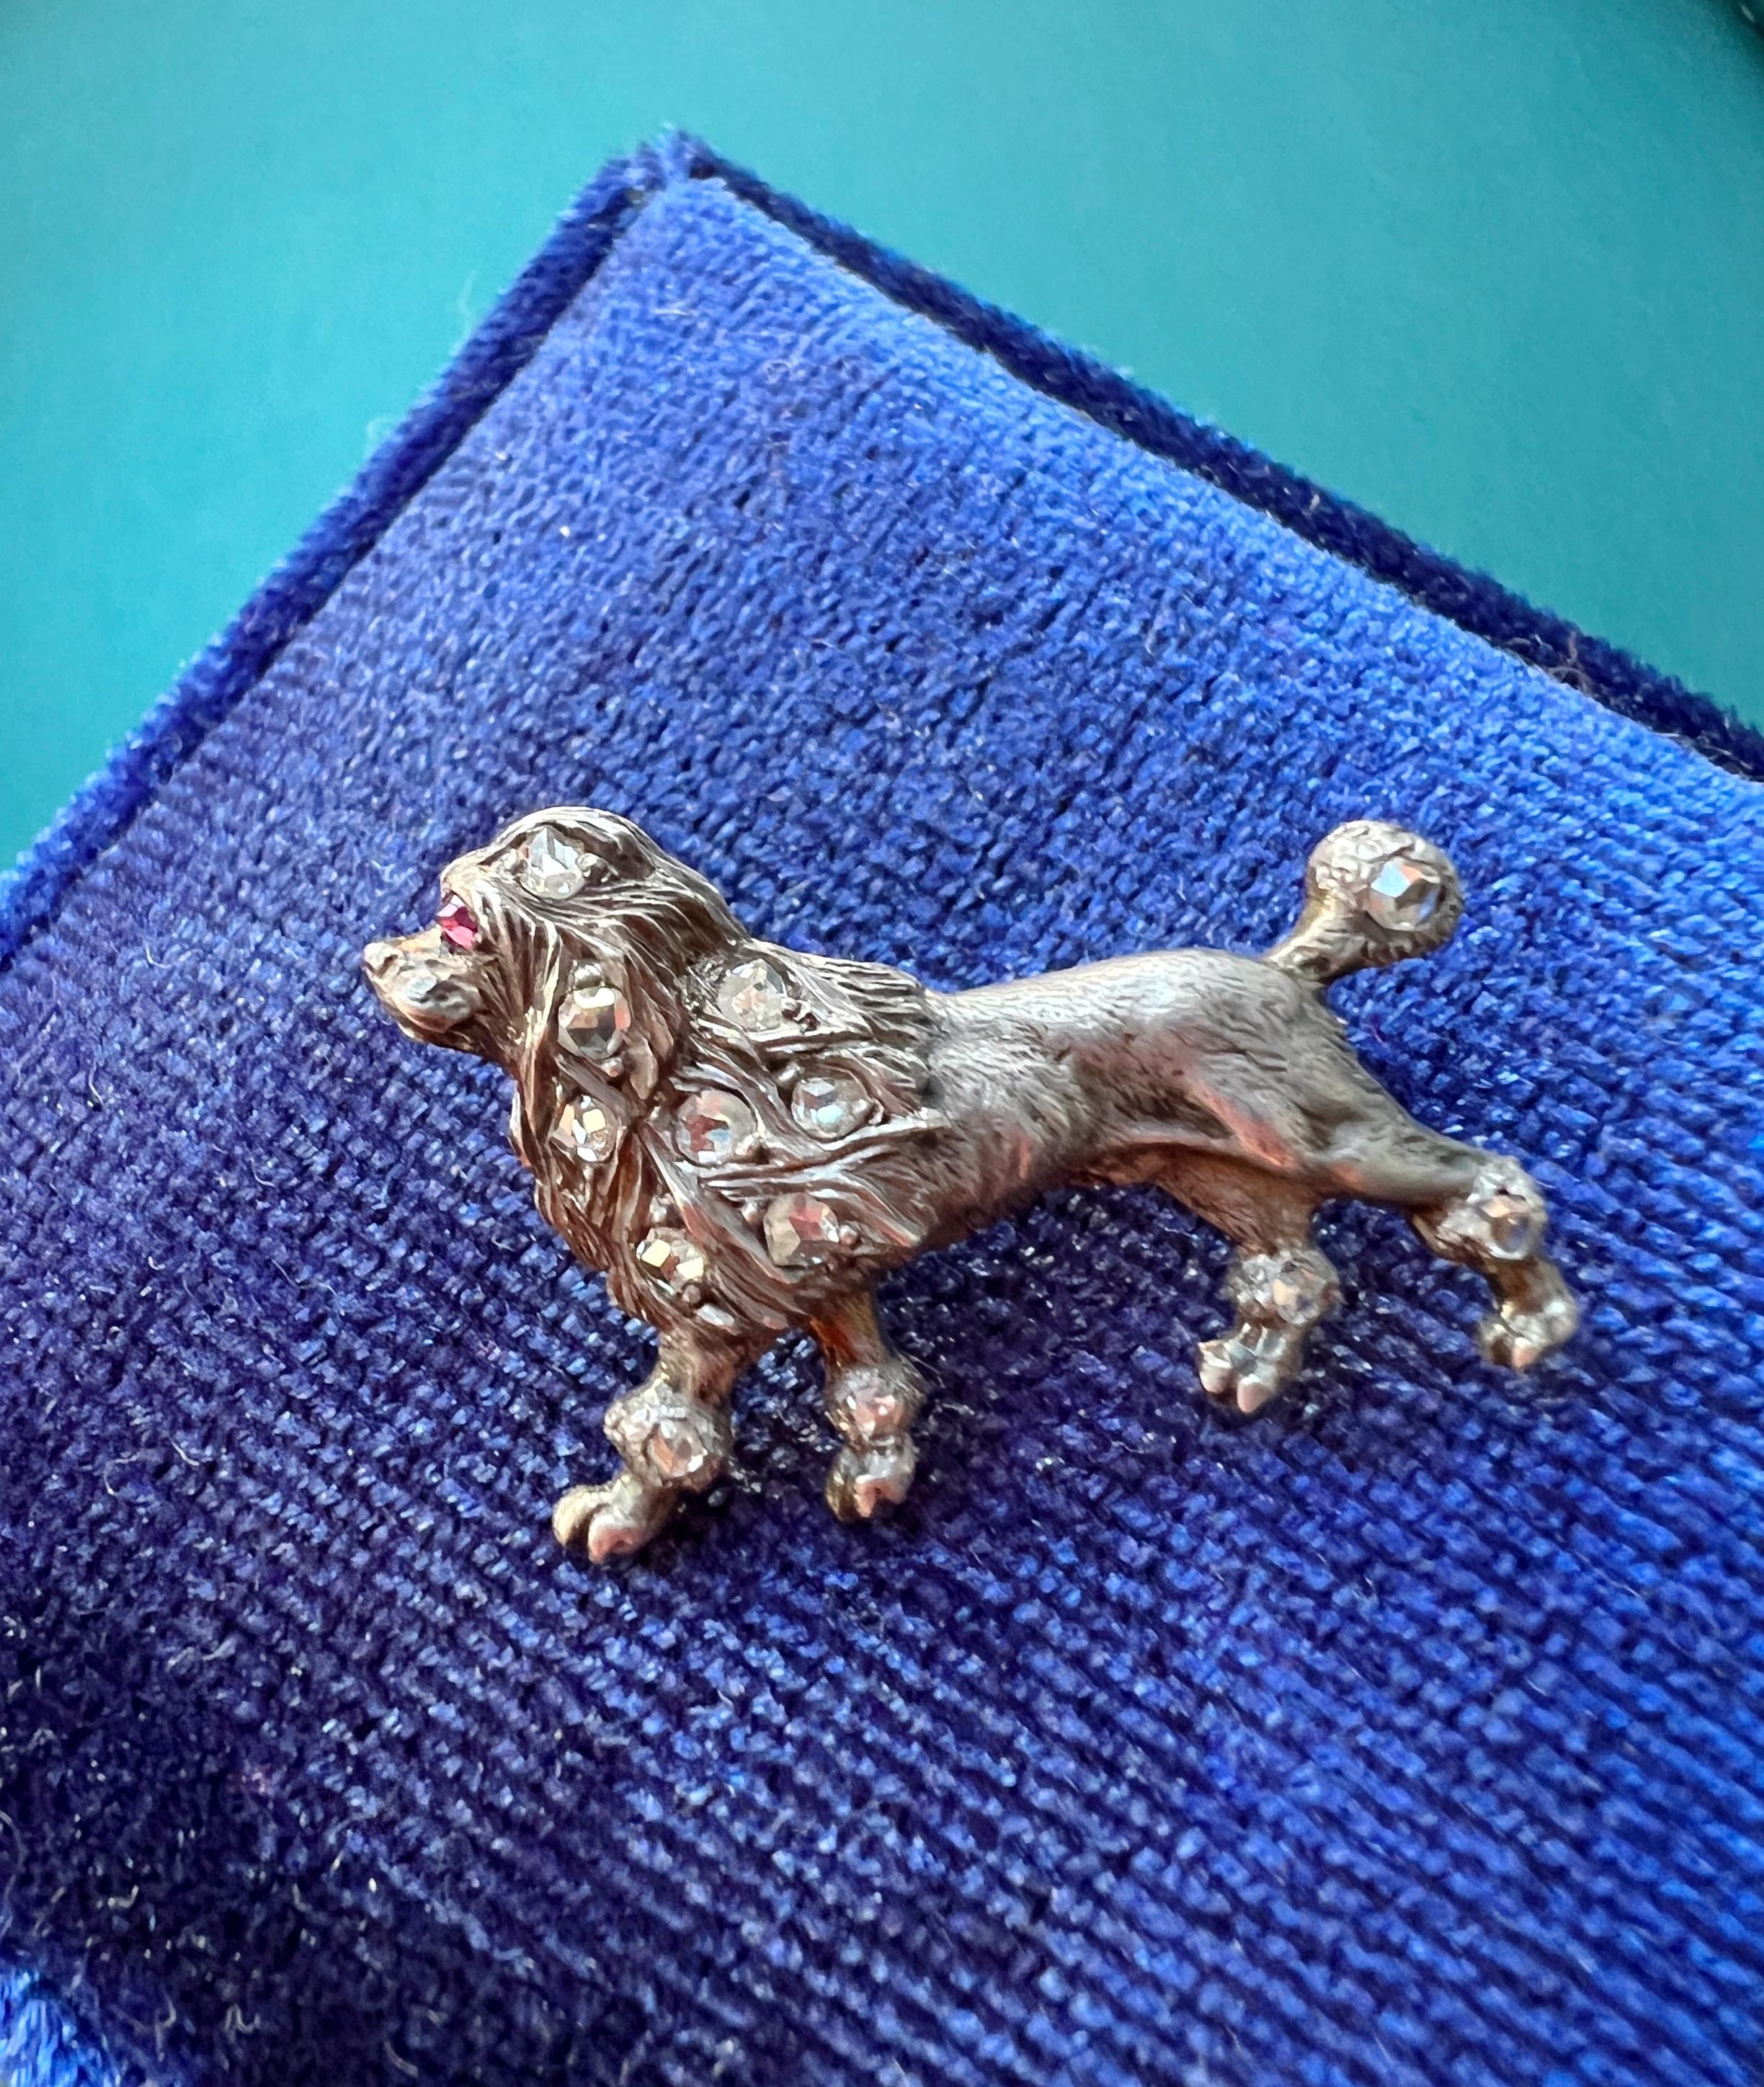 Perfectly capturing the expression, personality and physical characteristics of this adored poodle, the maker of this wonderful piece of jewelry pays attention to the smallest details to create a life-like miniature version of this dog on a